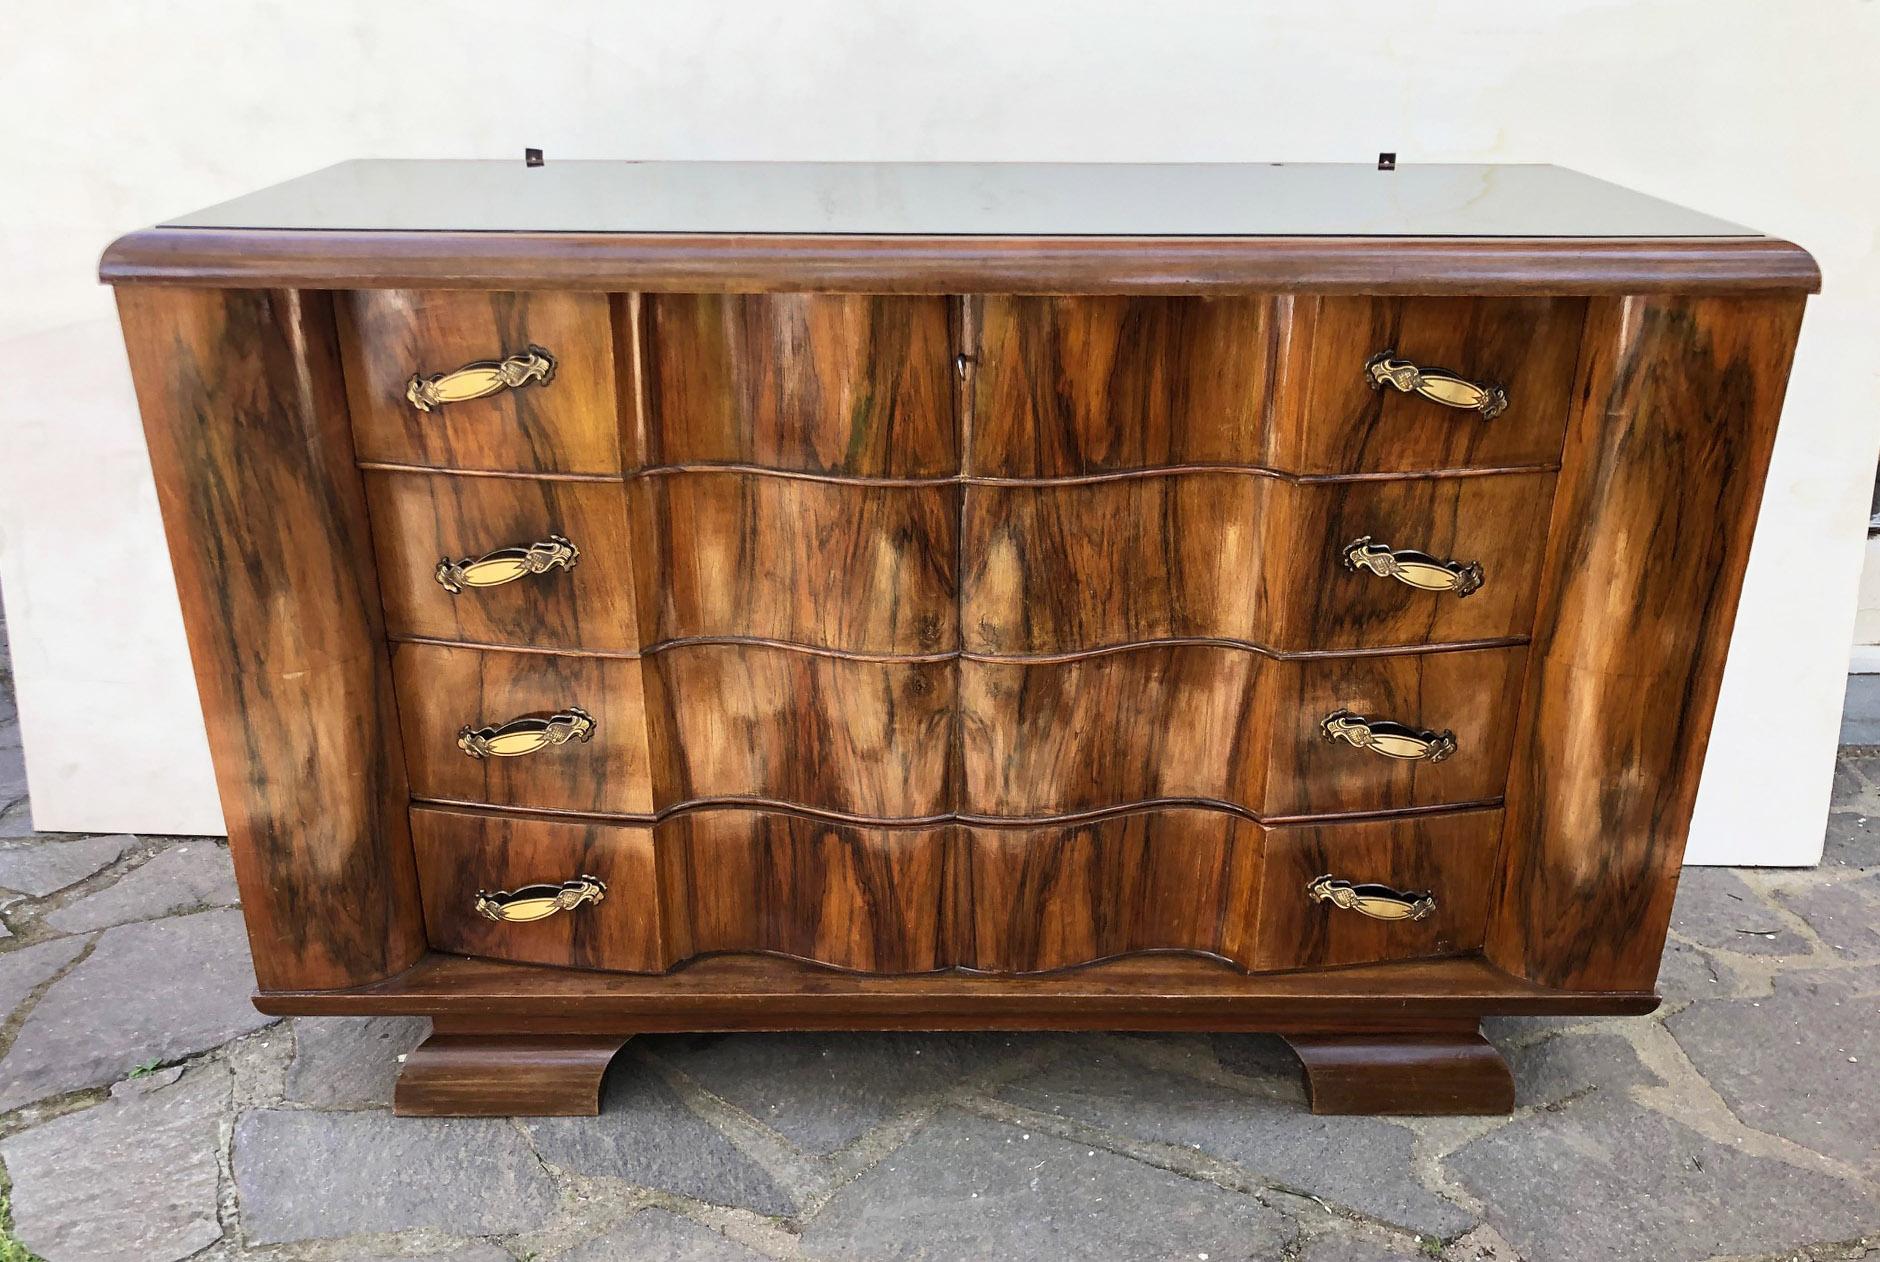  Chest of Drawers Rosewood Walnut Honeycomb Natural Color Italian Design In Good Condition For Sale In Buggiano, IT